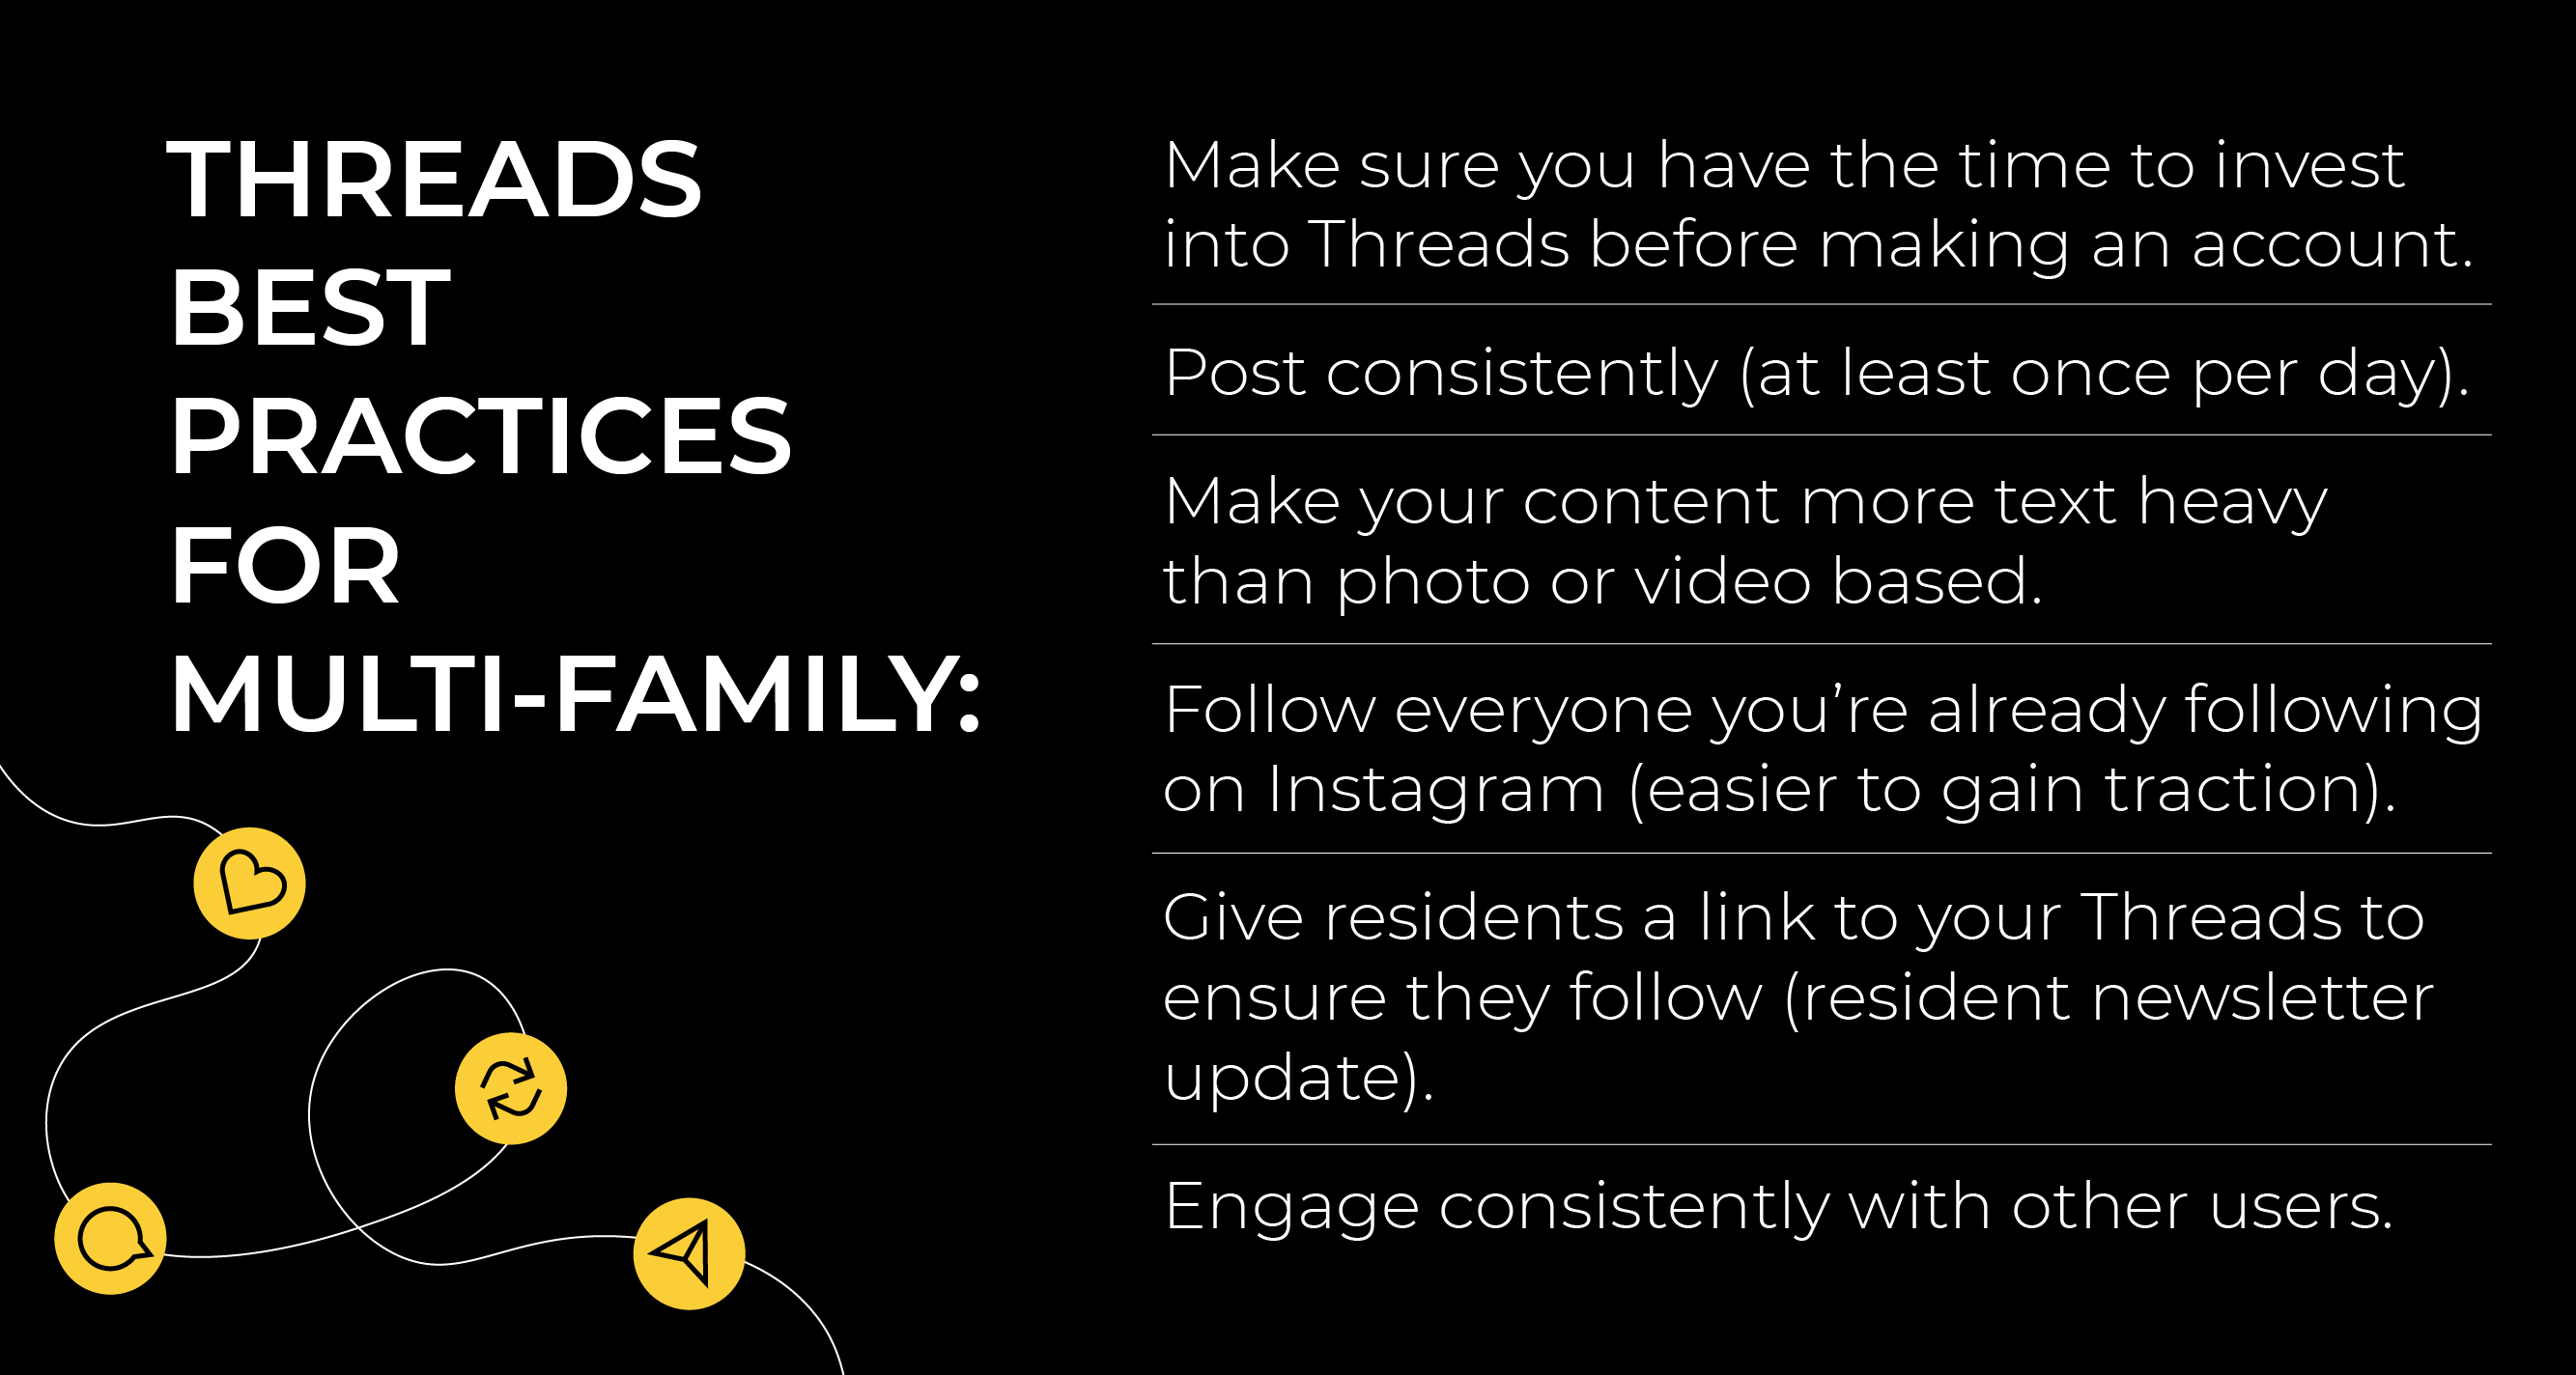 Threads Best Practices for Multi-Family